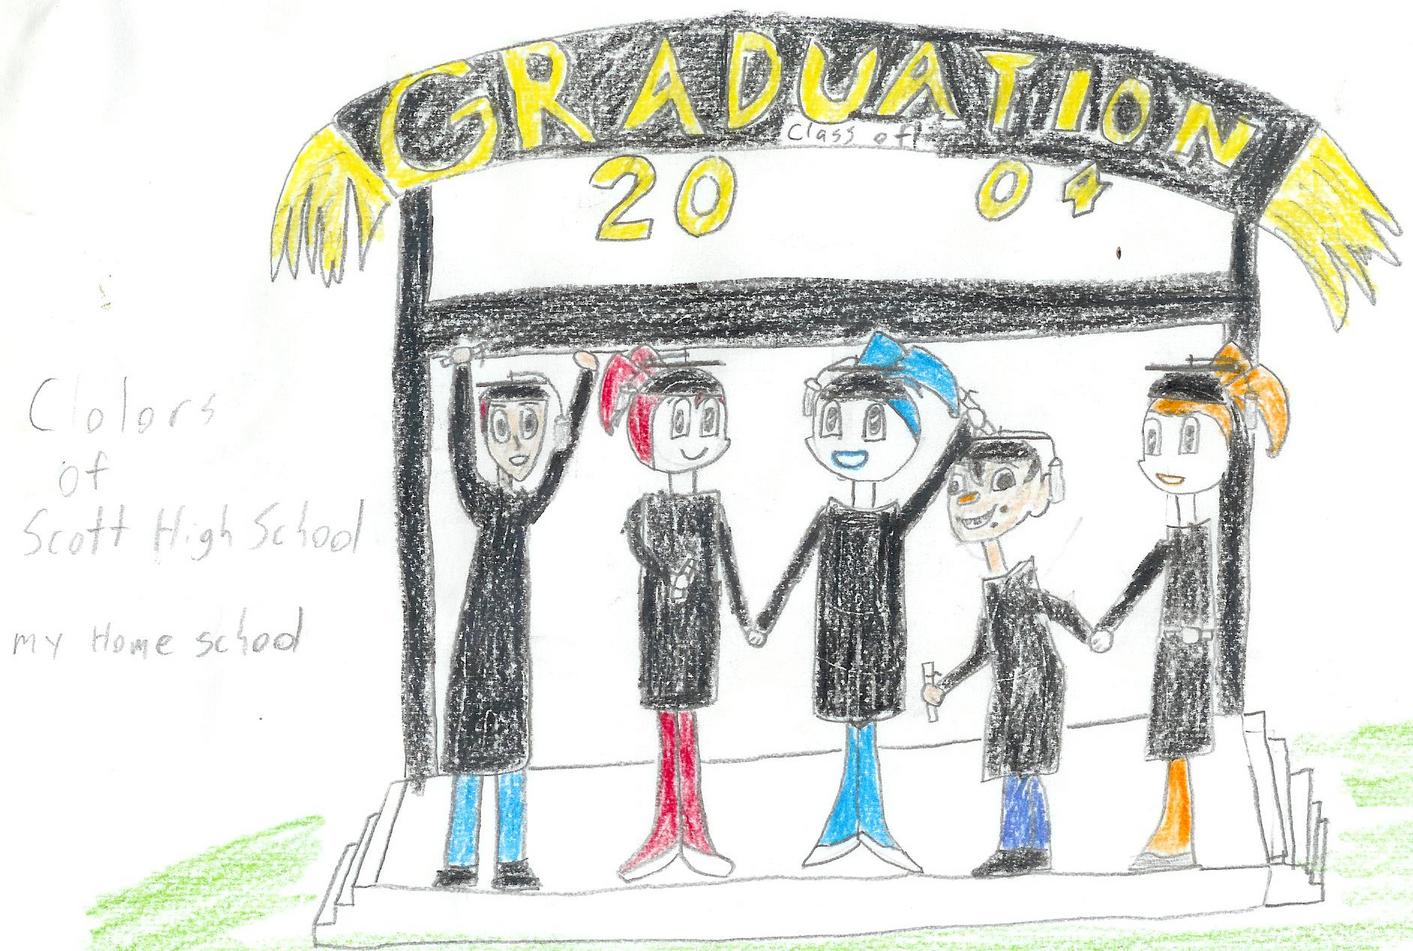 Graduation 2004 by Chevelle